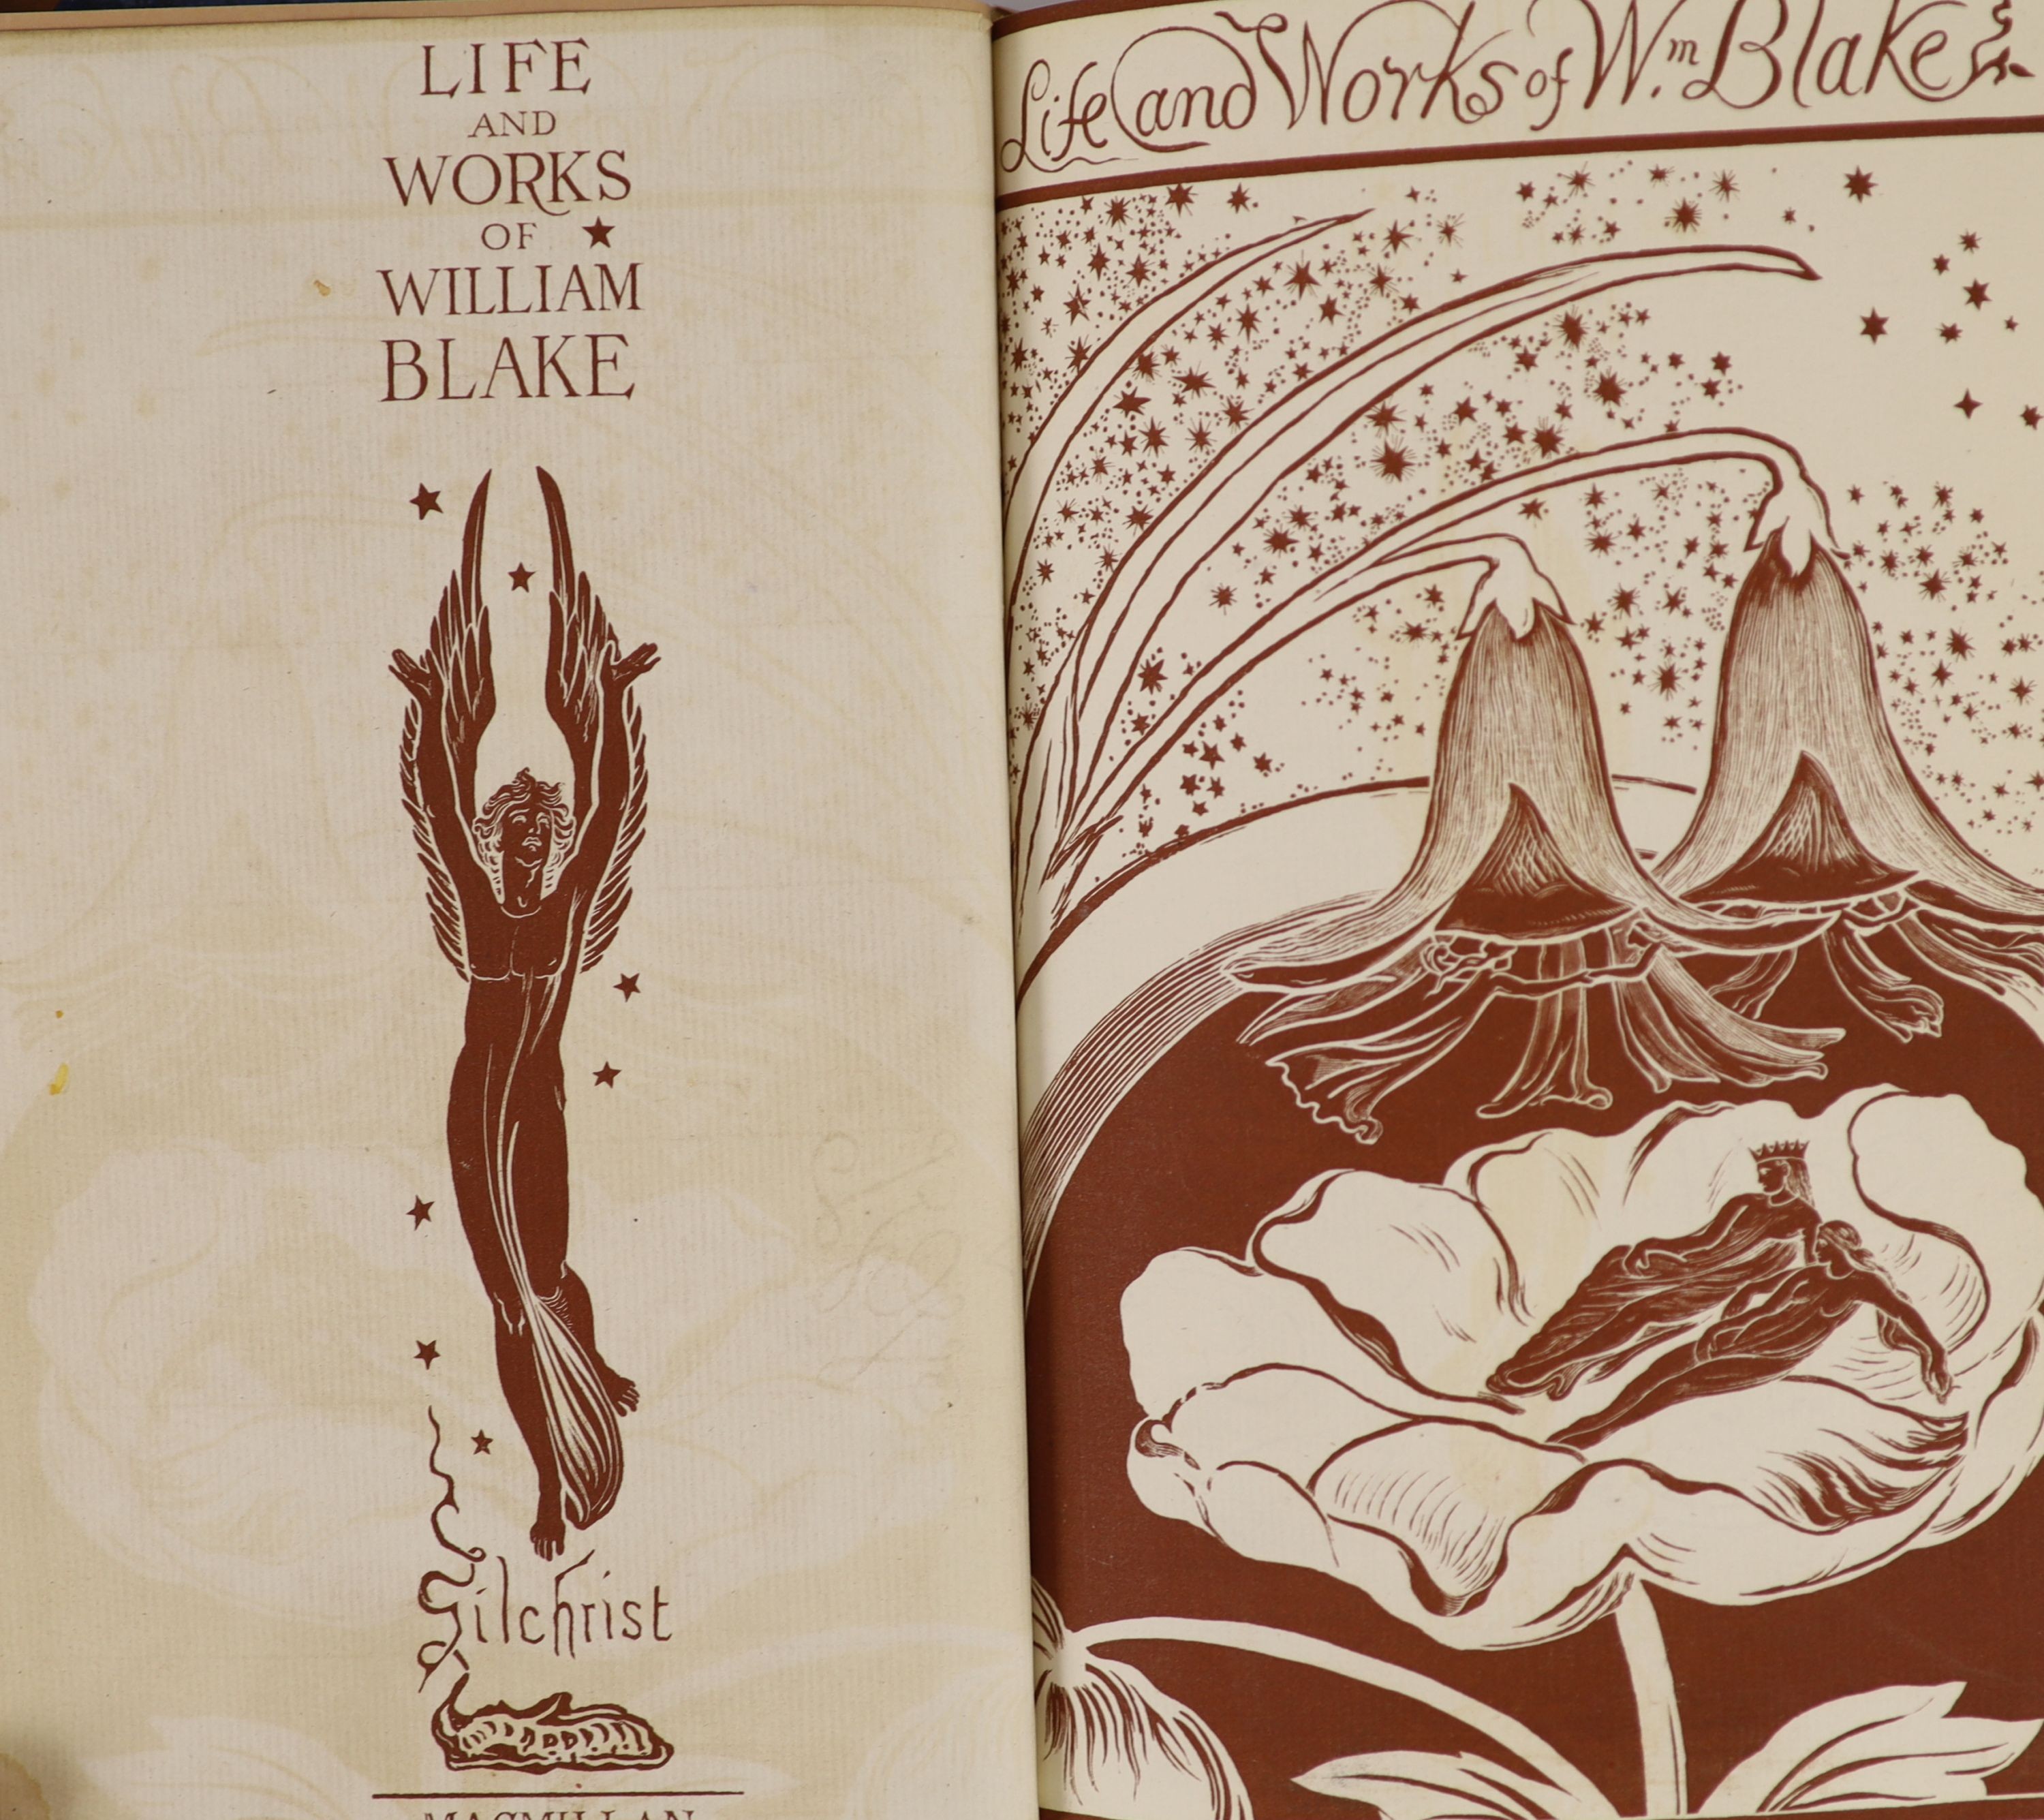 Gilchrist, Alexander- Life of William Blake, 2 vols, 2nd edition, rebound half calf with marbled boards, Macmillan, London, 1880